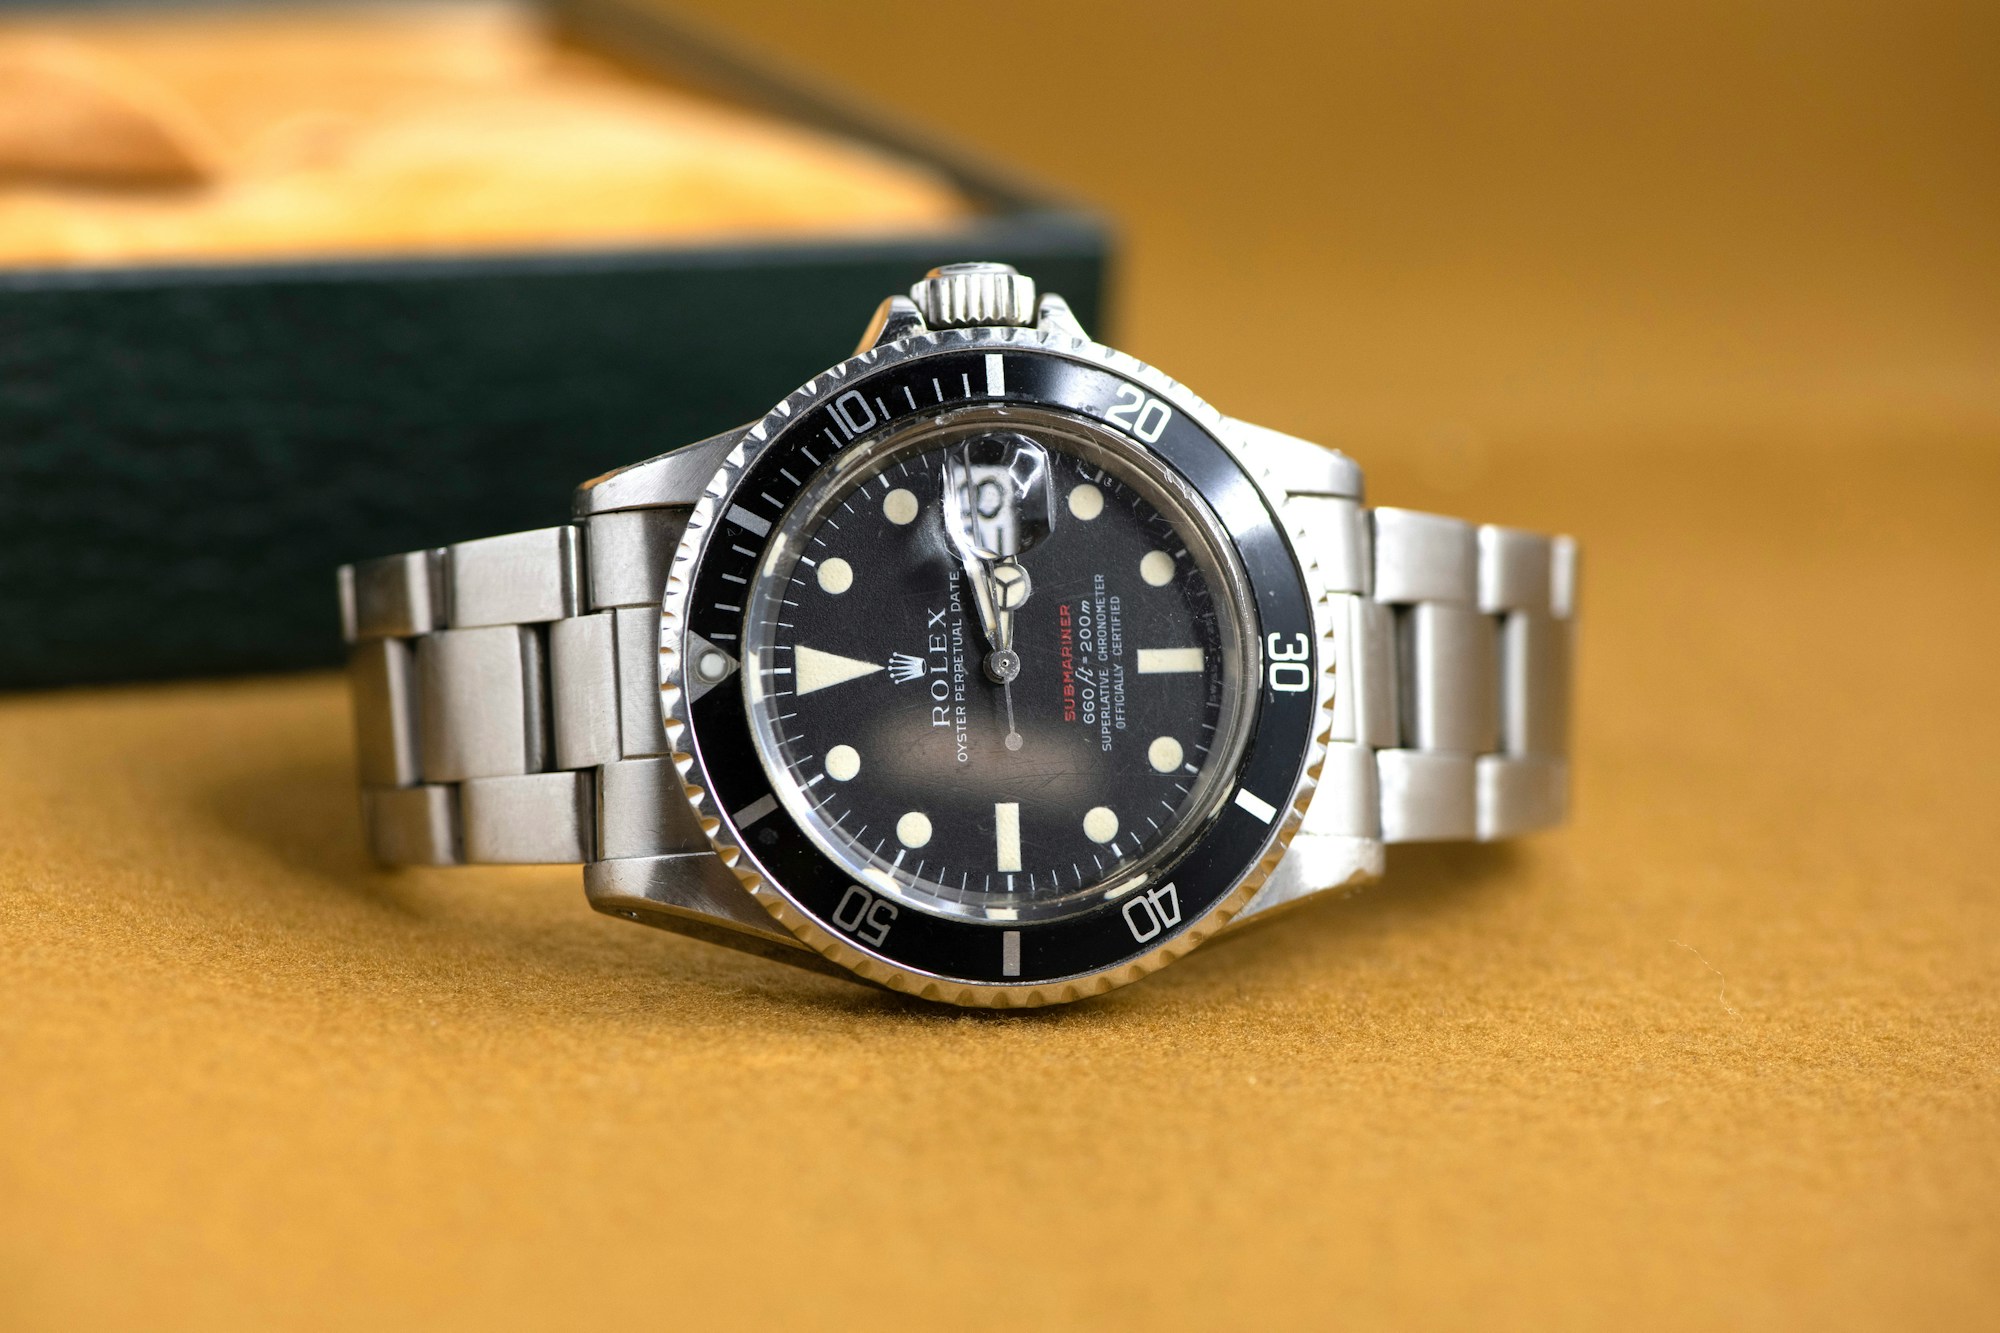 1969 ROLEX SUBMARINER 'RED' sale by auction in London, United Kingdom